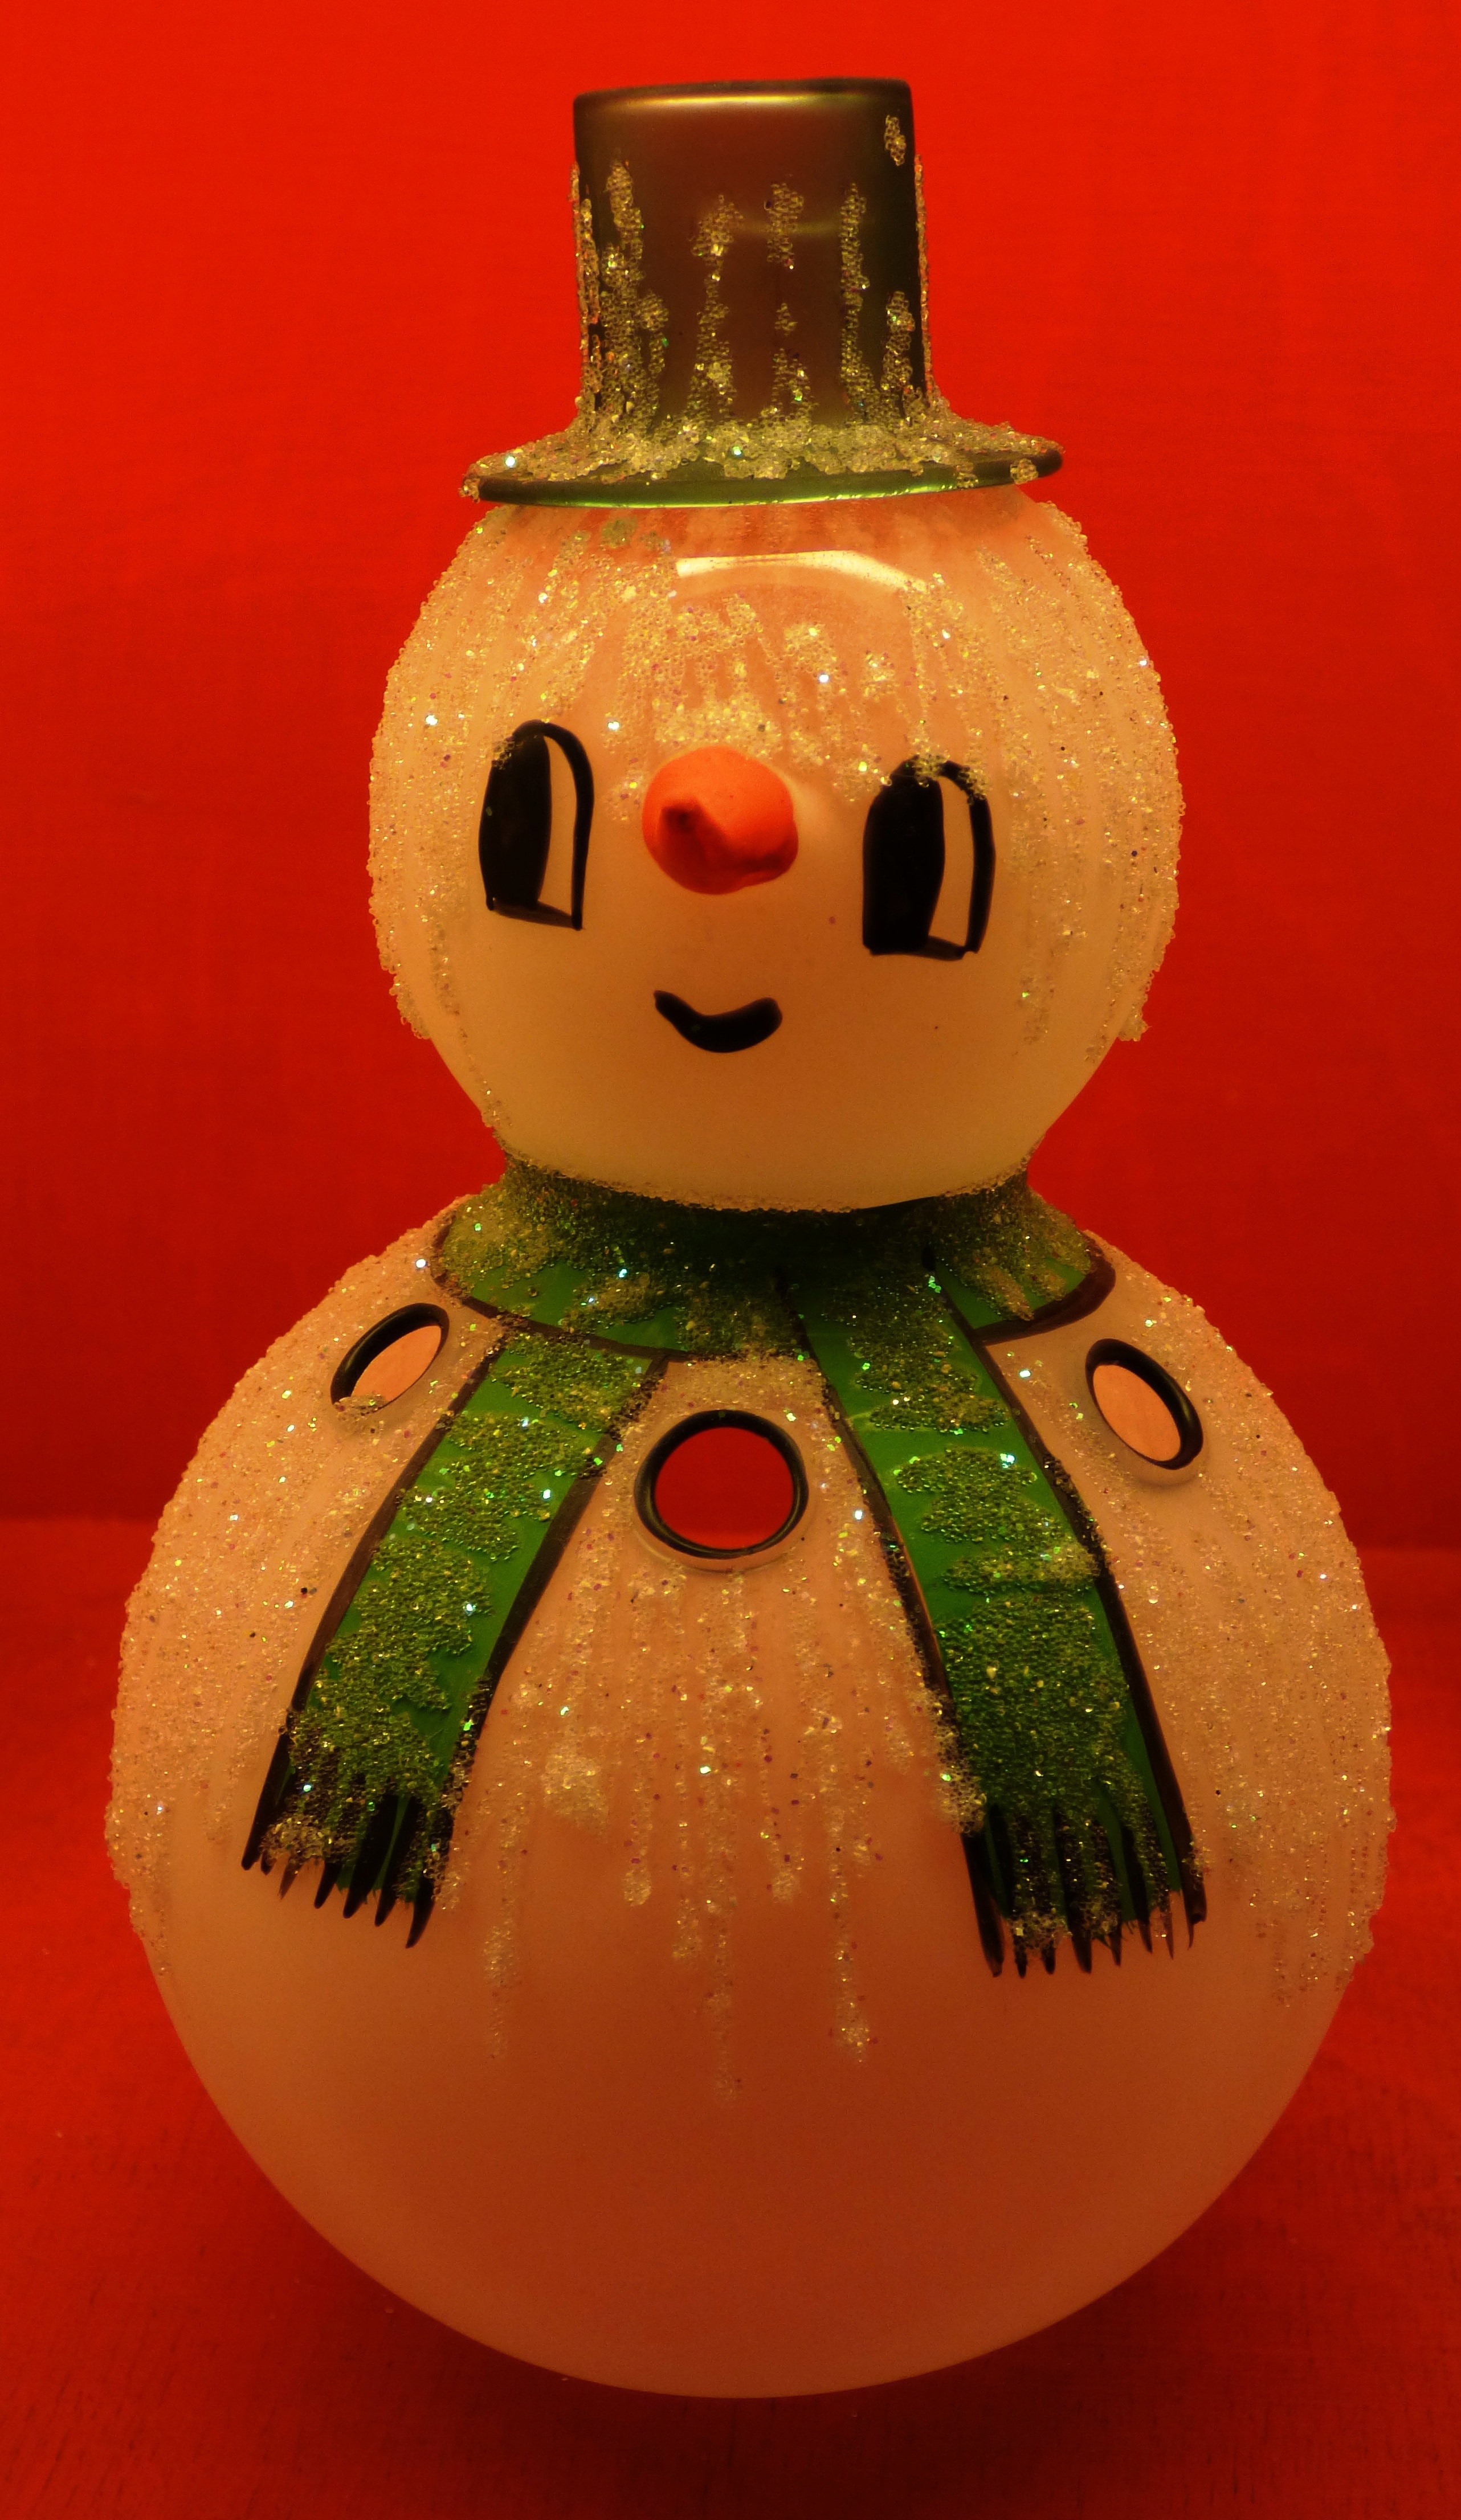 closed up photo of snowman figurine wearing green scarf and hat